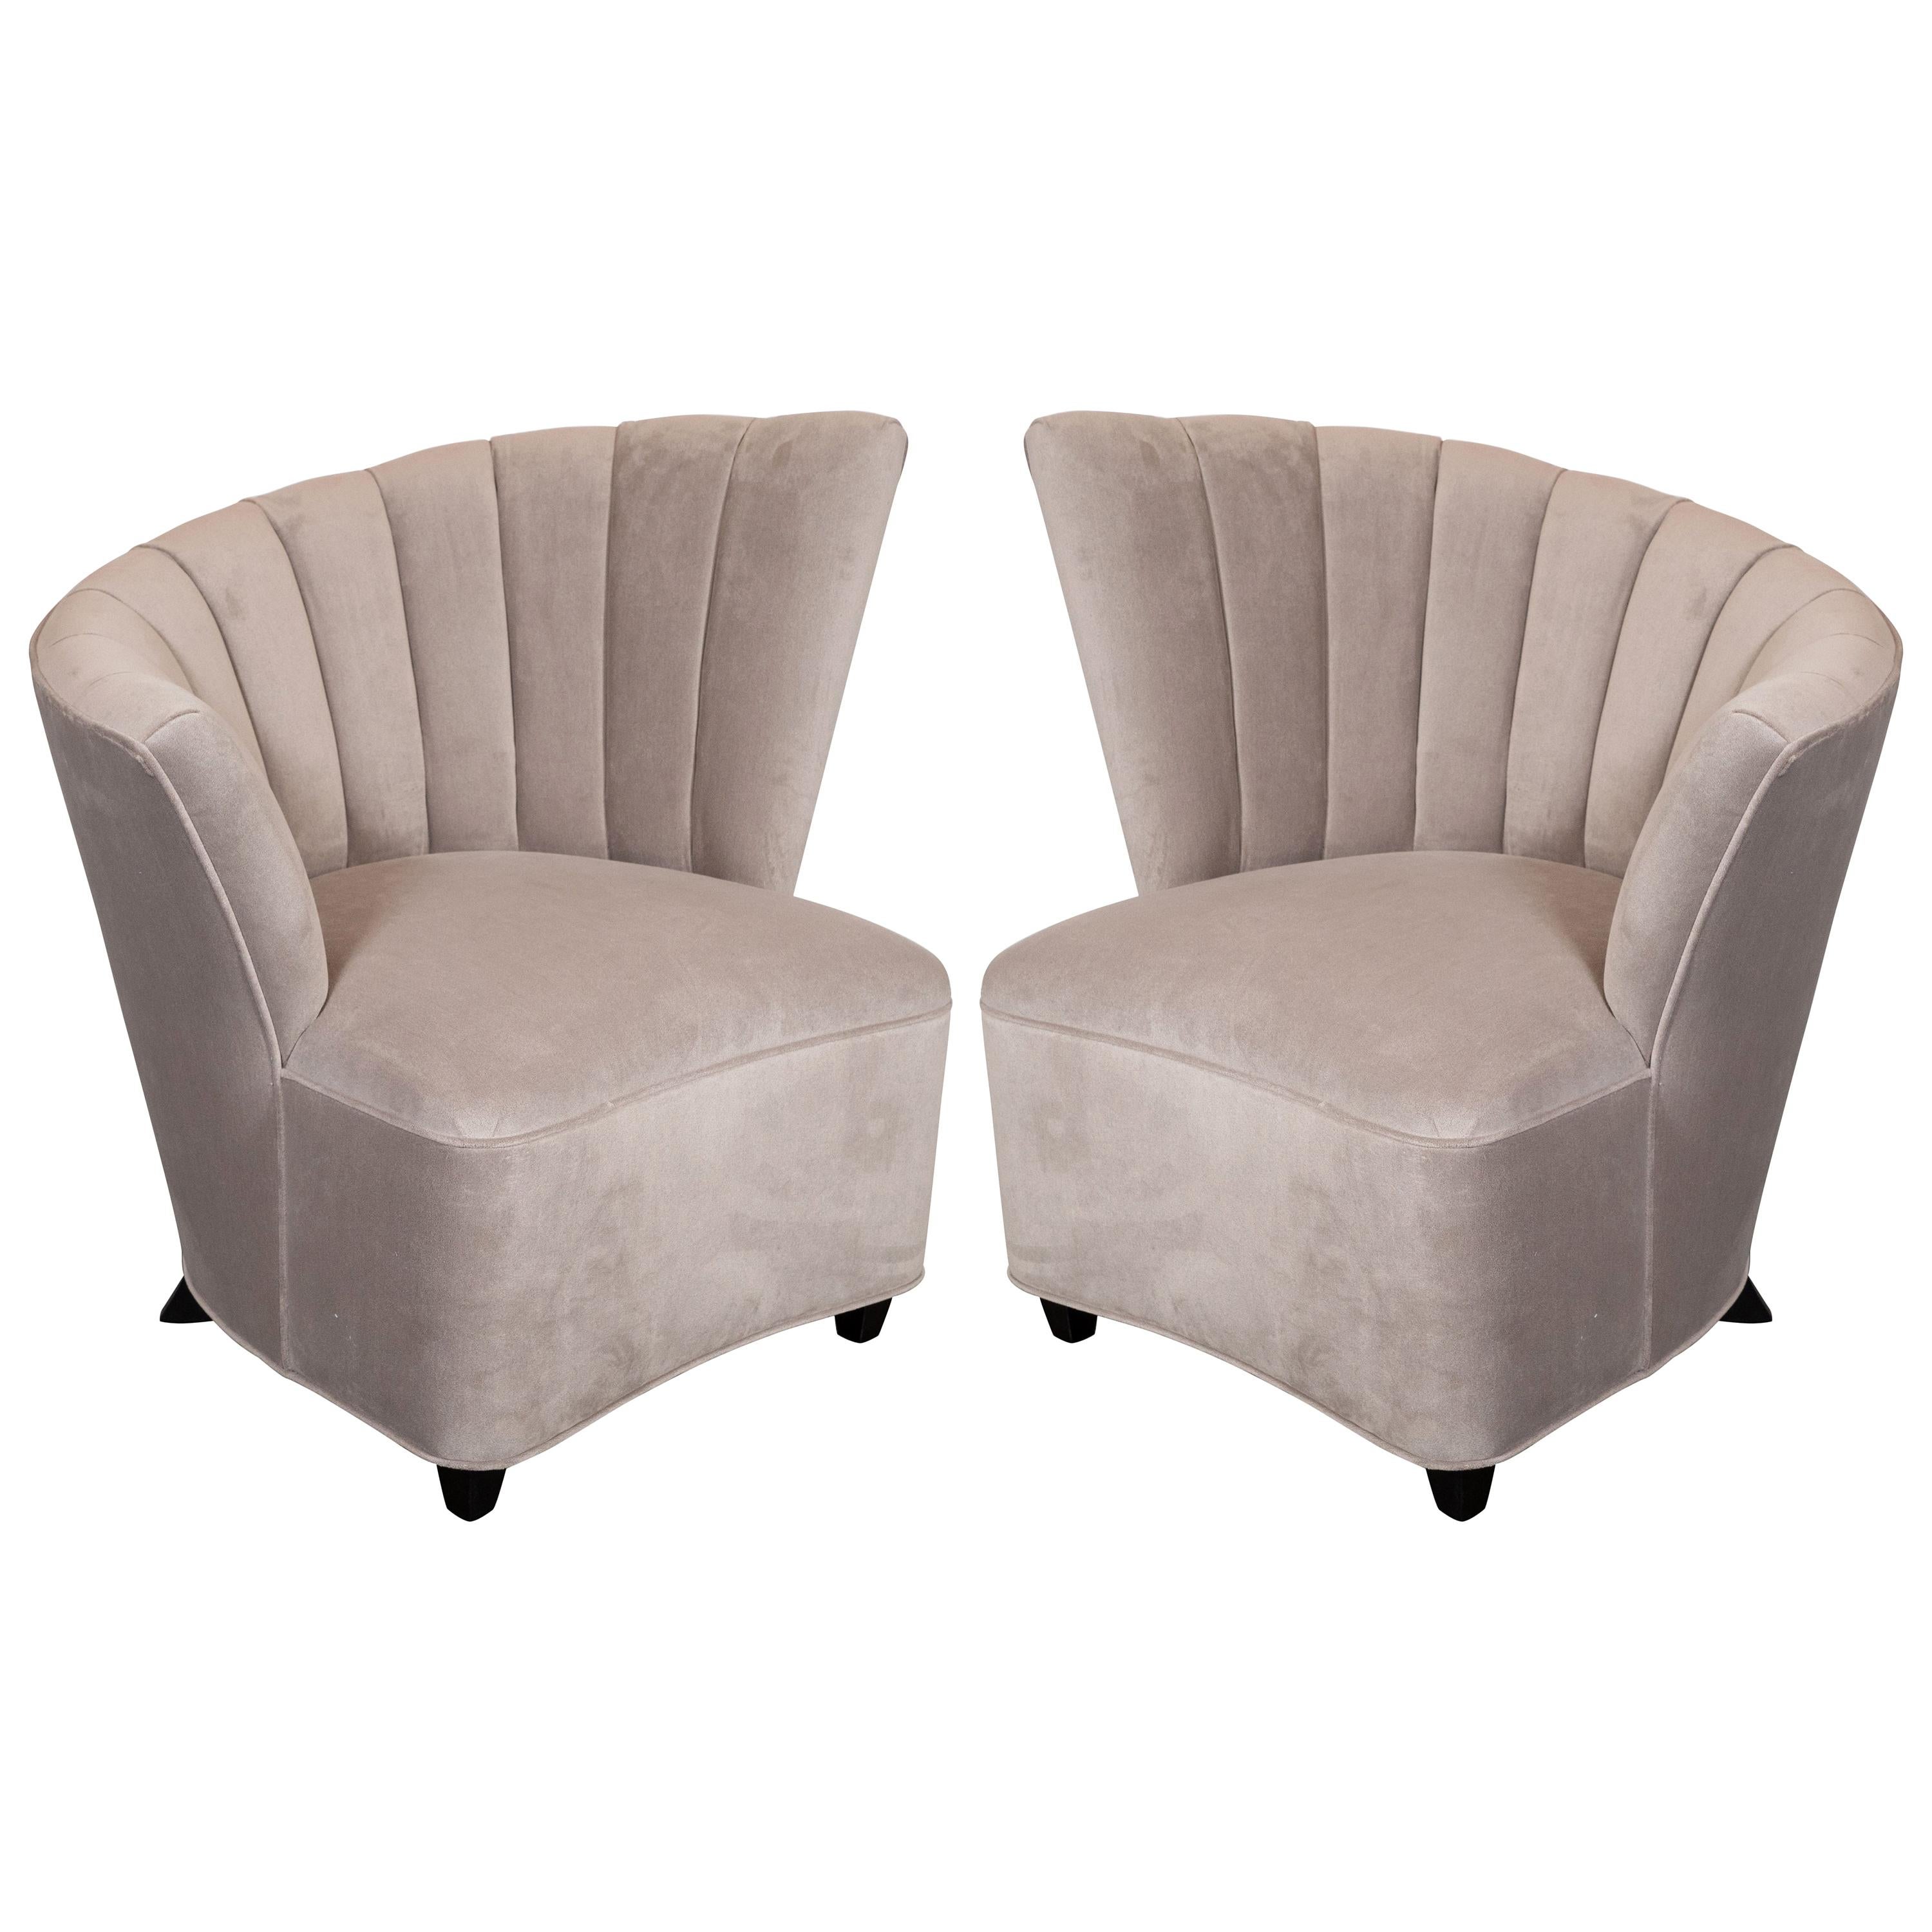 Pair of Hollywood Asymmetrical Tufted Hollywood Chairs in Smoked Topaz Velvet